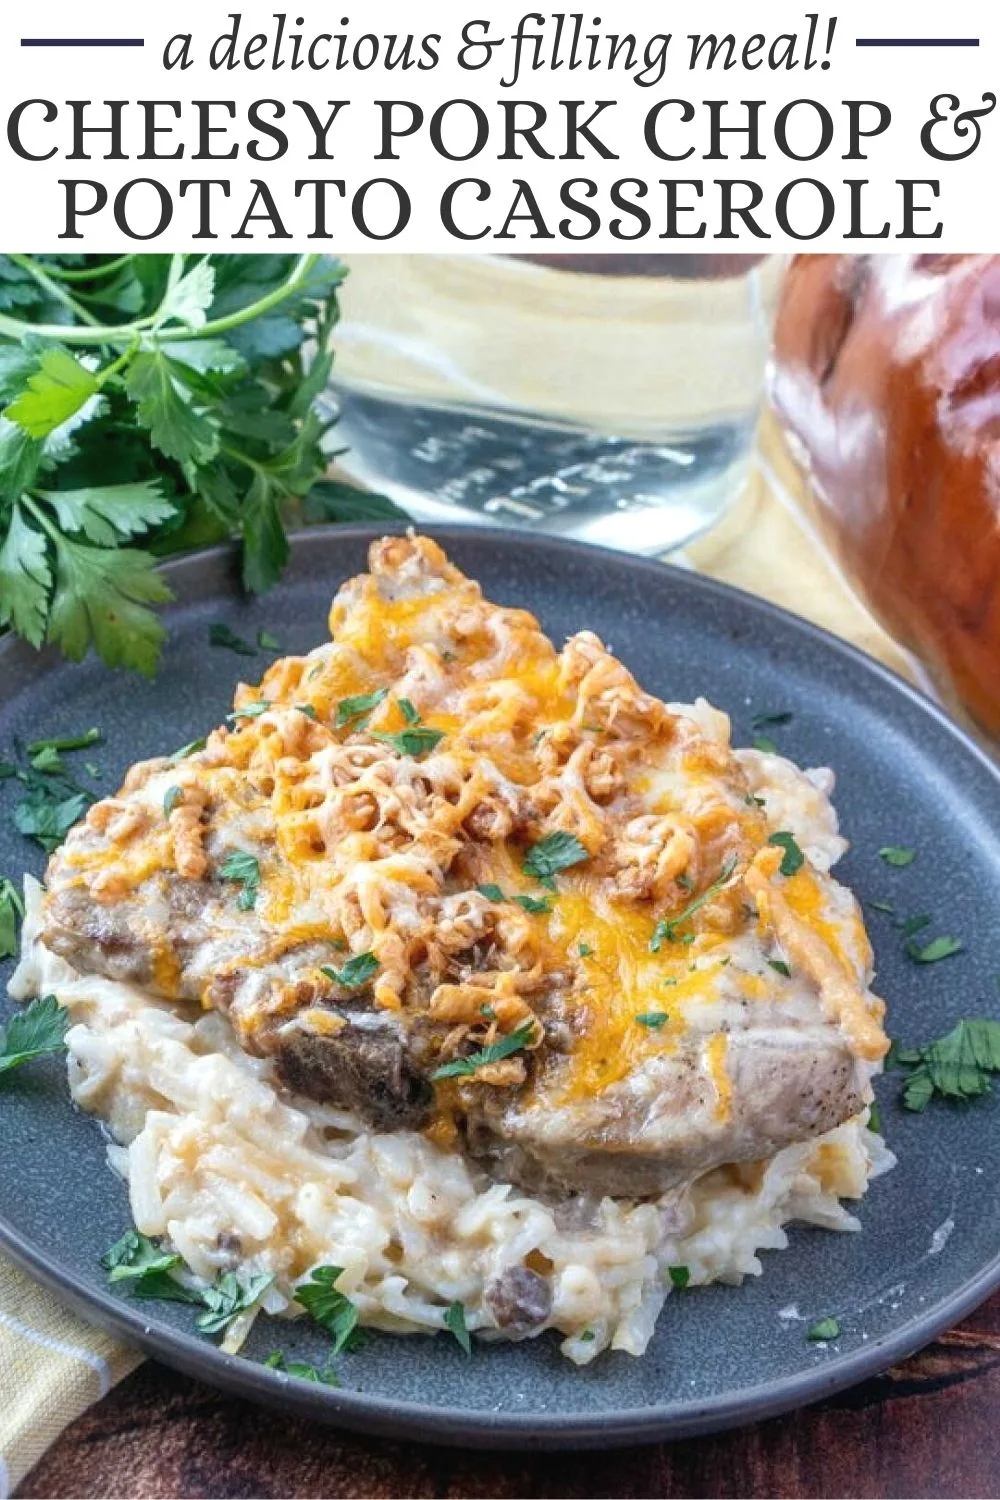 Hearty cheesy pork chop and potato casserole is a great meal the whole family will love. The pork chops and potatoes are even better when they cook together. Add a vegetable and dinner is done!